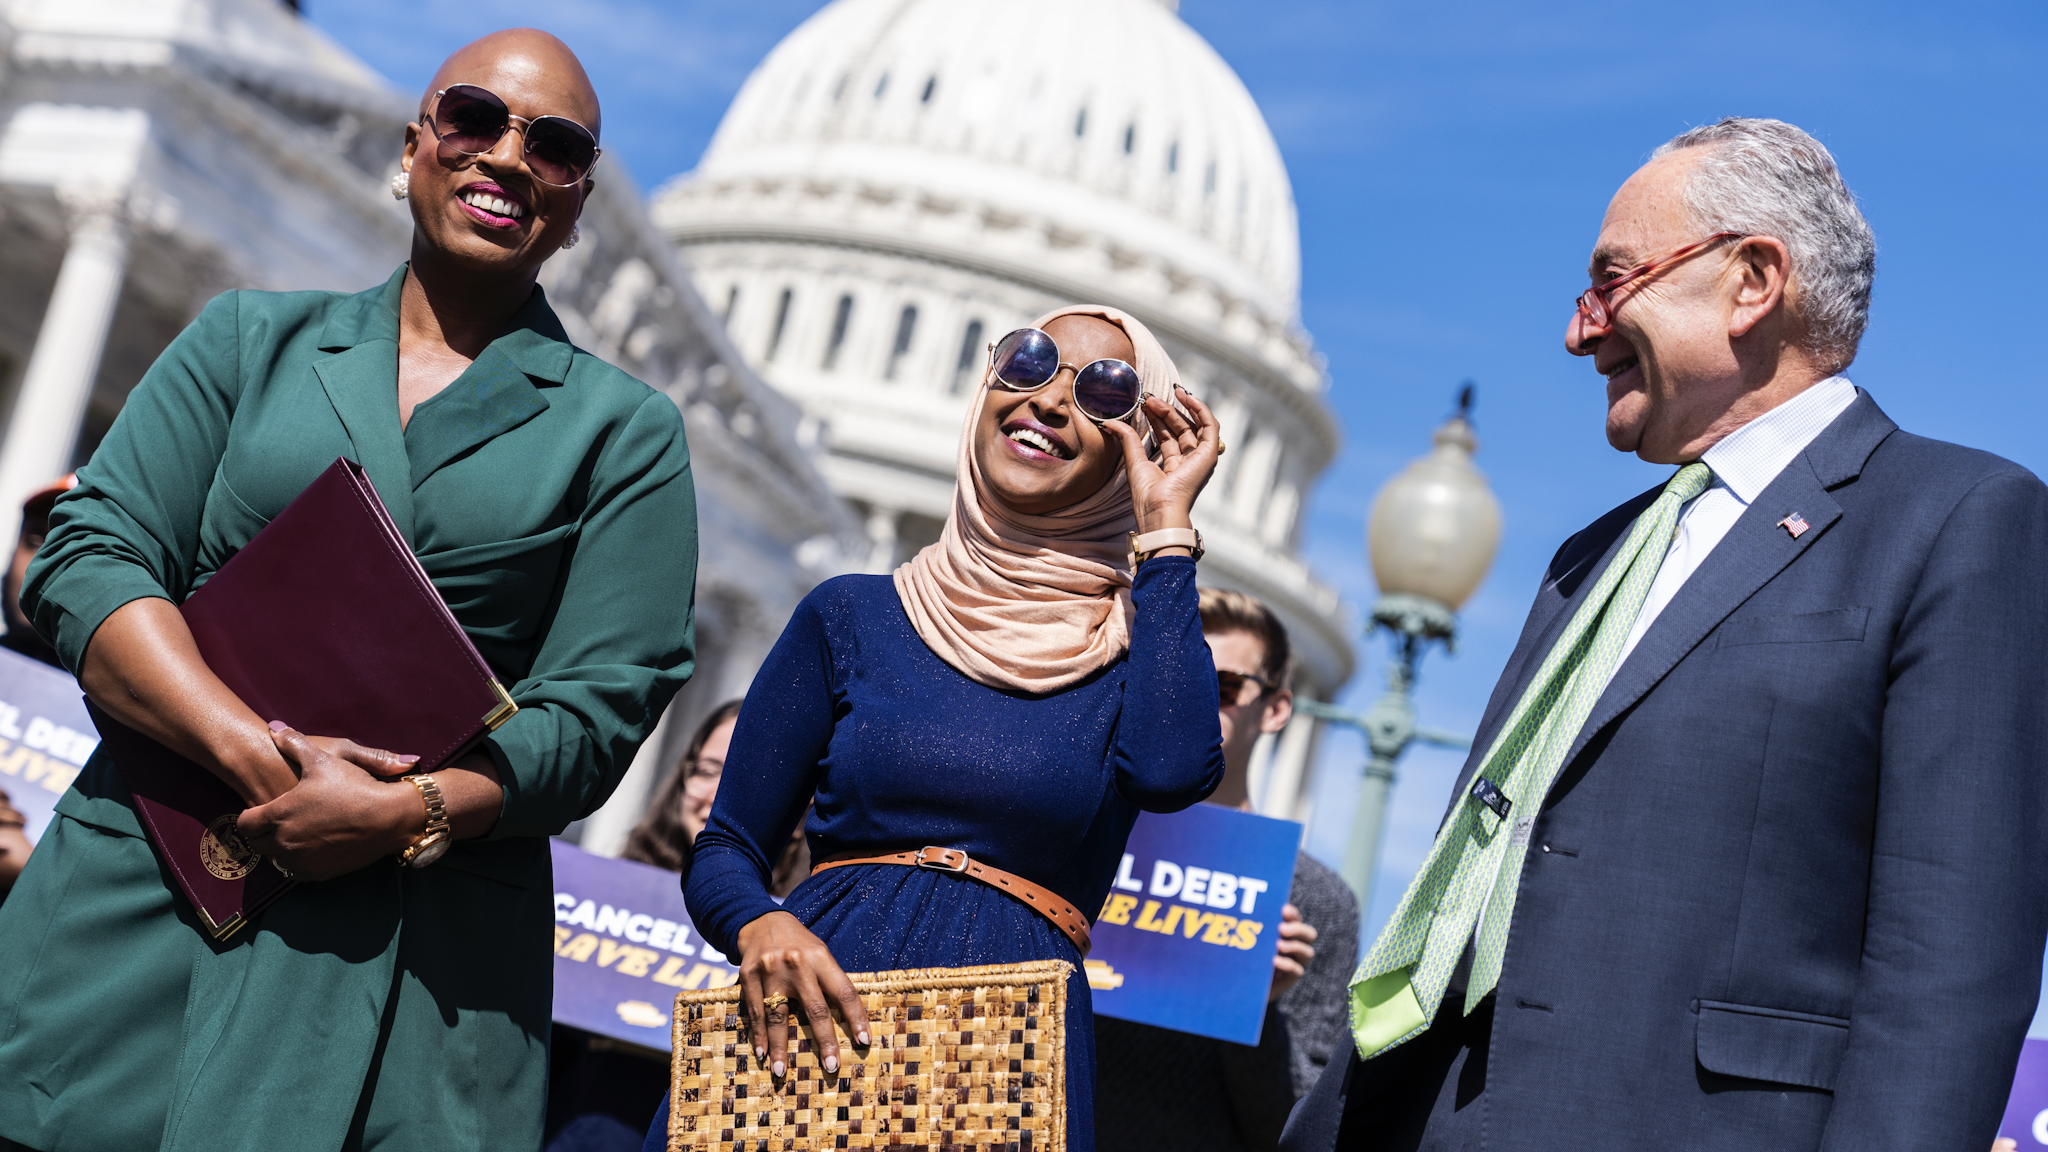 UNITED STATES - SEPTEMBER 29: From left, Reps. Ayanna Pressley, D-Mass., Ilhan Omar, D-Minn., and Senate Majority Leader Charles Schumer, D-N.Y., attend a news conference outside of the U.S. Capitol on the benefits of President Bidens student debt relief plan on Thursday, September 29, 2022.